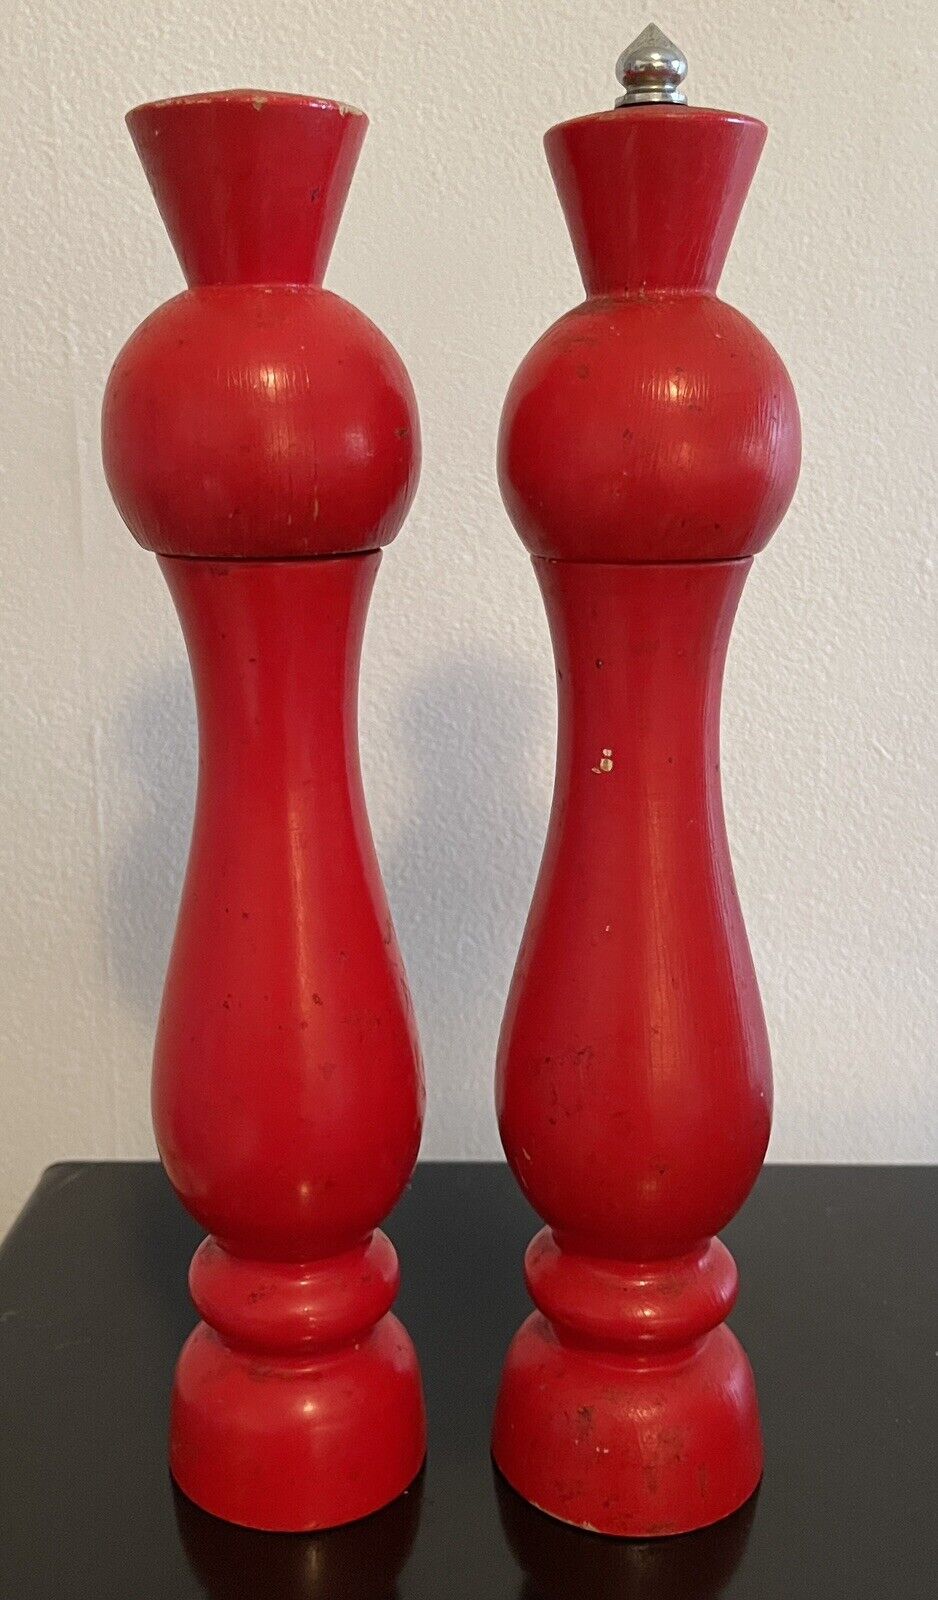 Vintage True Red Wood Salt Shaker and Pepper Mill Farmhouse 10” Tall Preowned